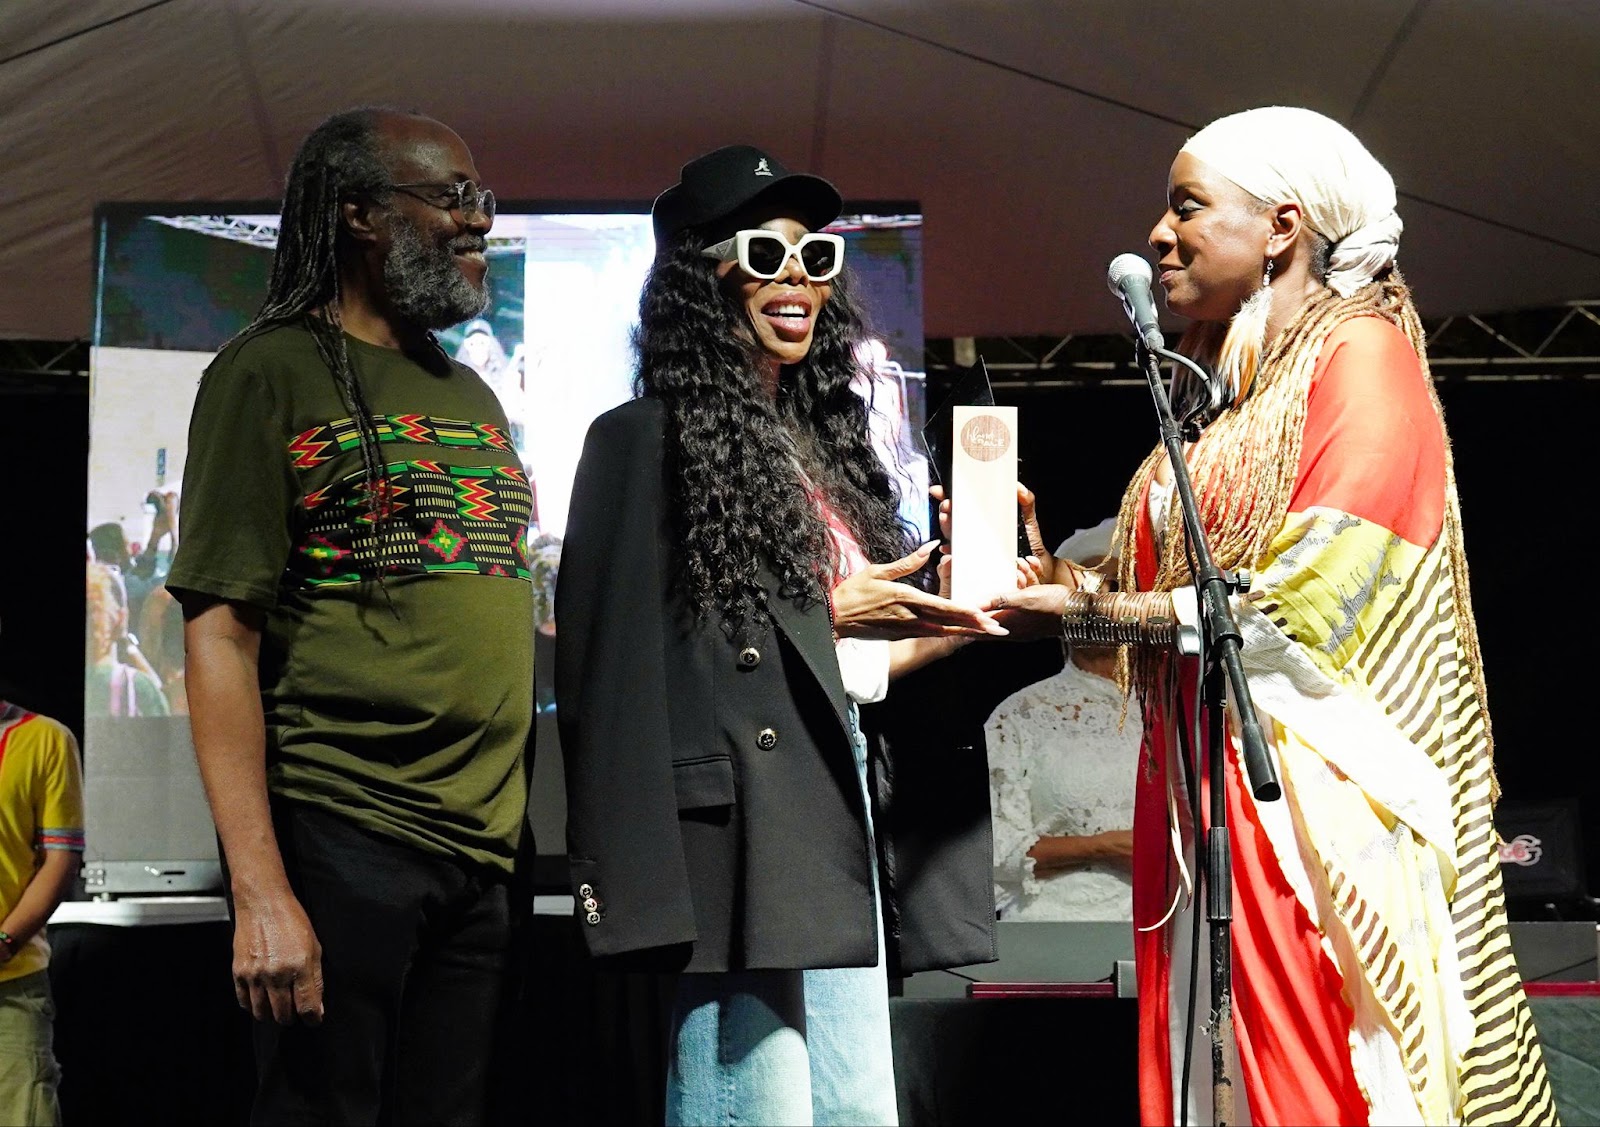 The inaugural Reggae Genealogy music festival and concert event